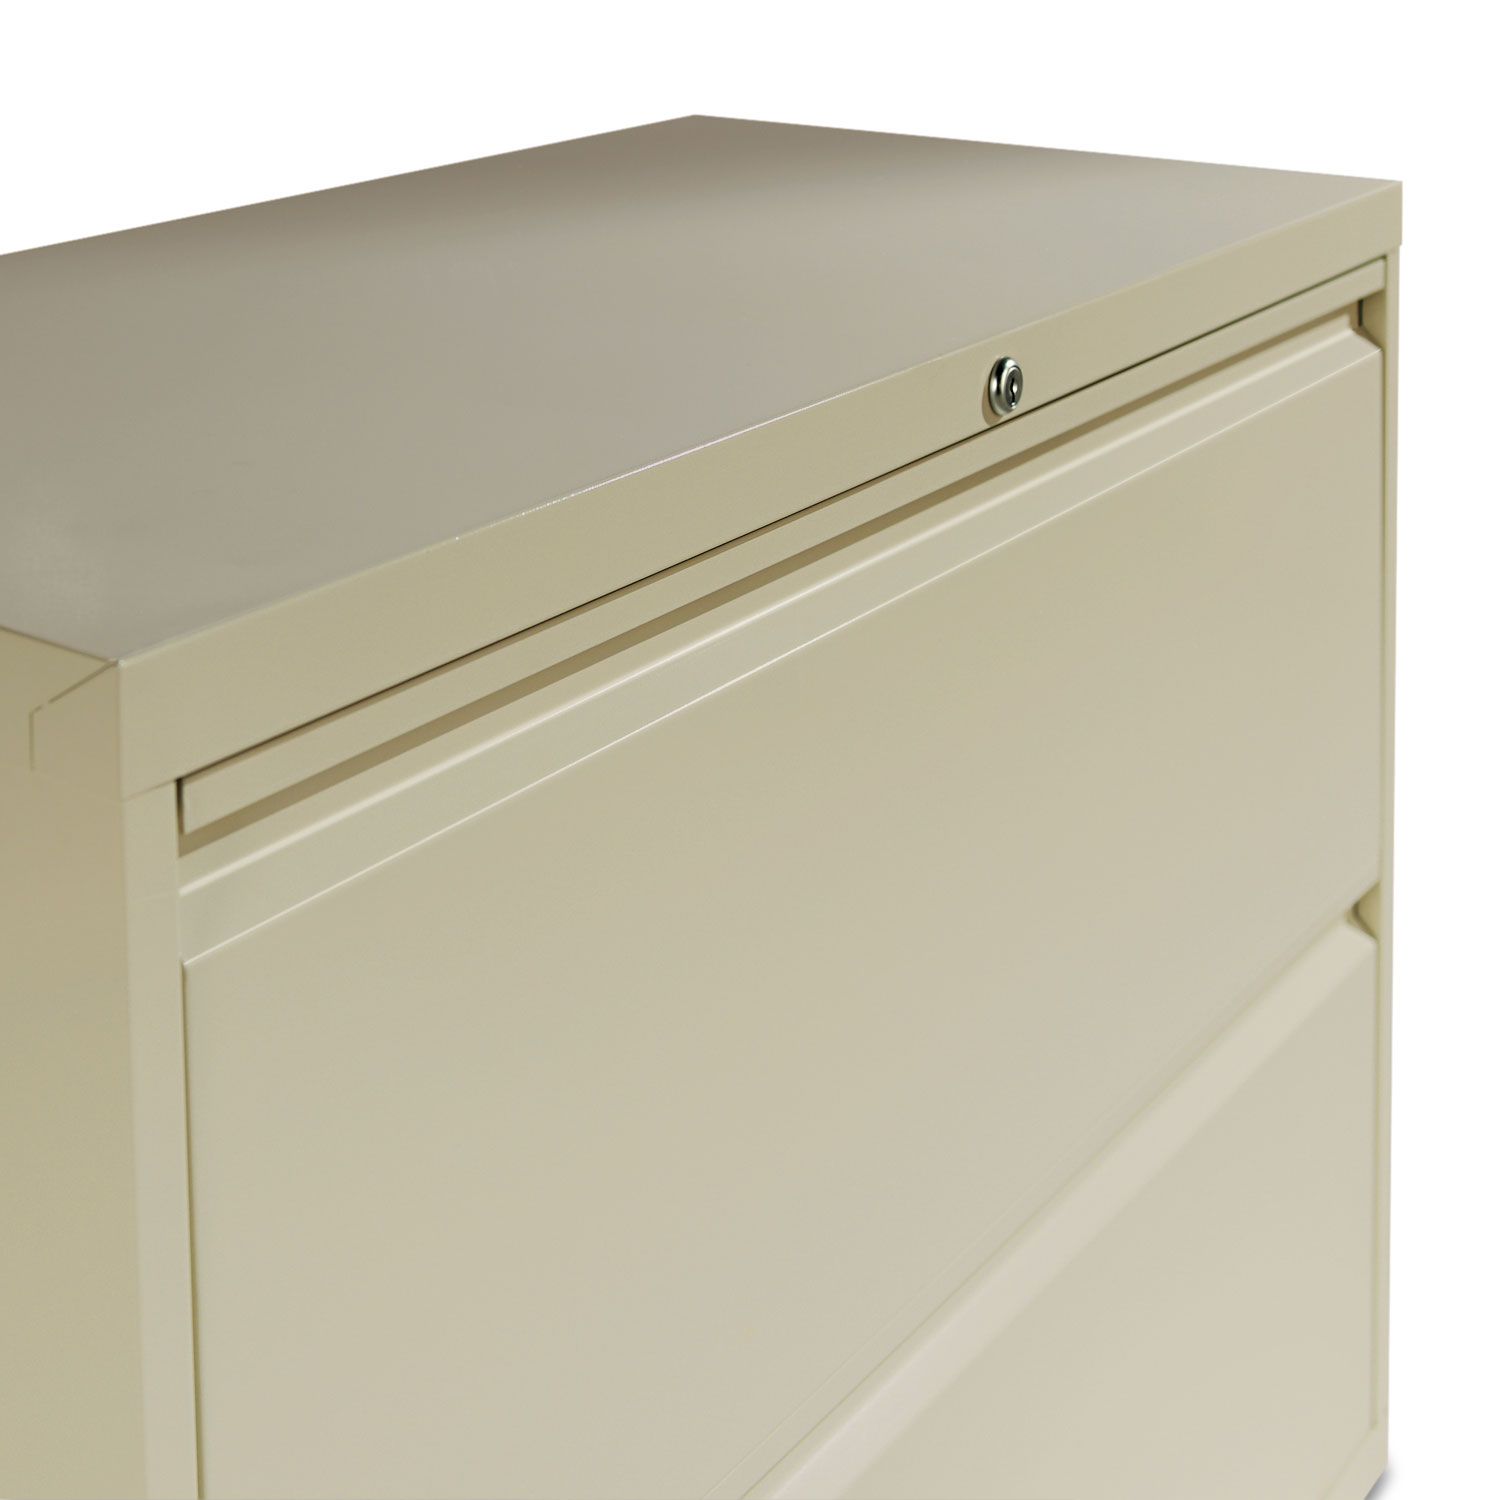 Two-Drawer Lateral File Cabinet, 30w x 19-1/4d x 28-3/8h, Putty